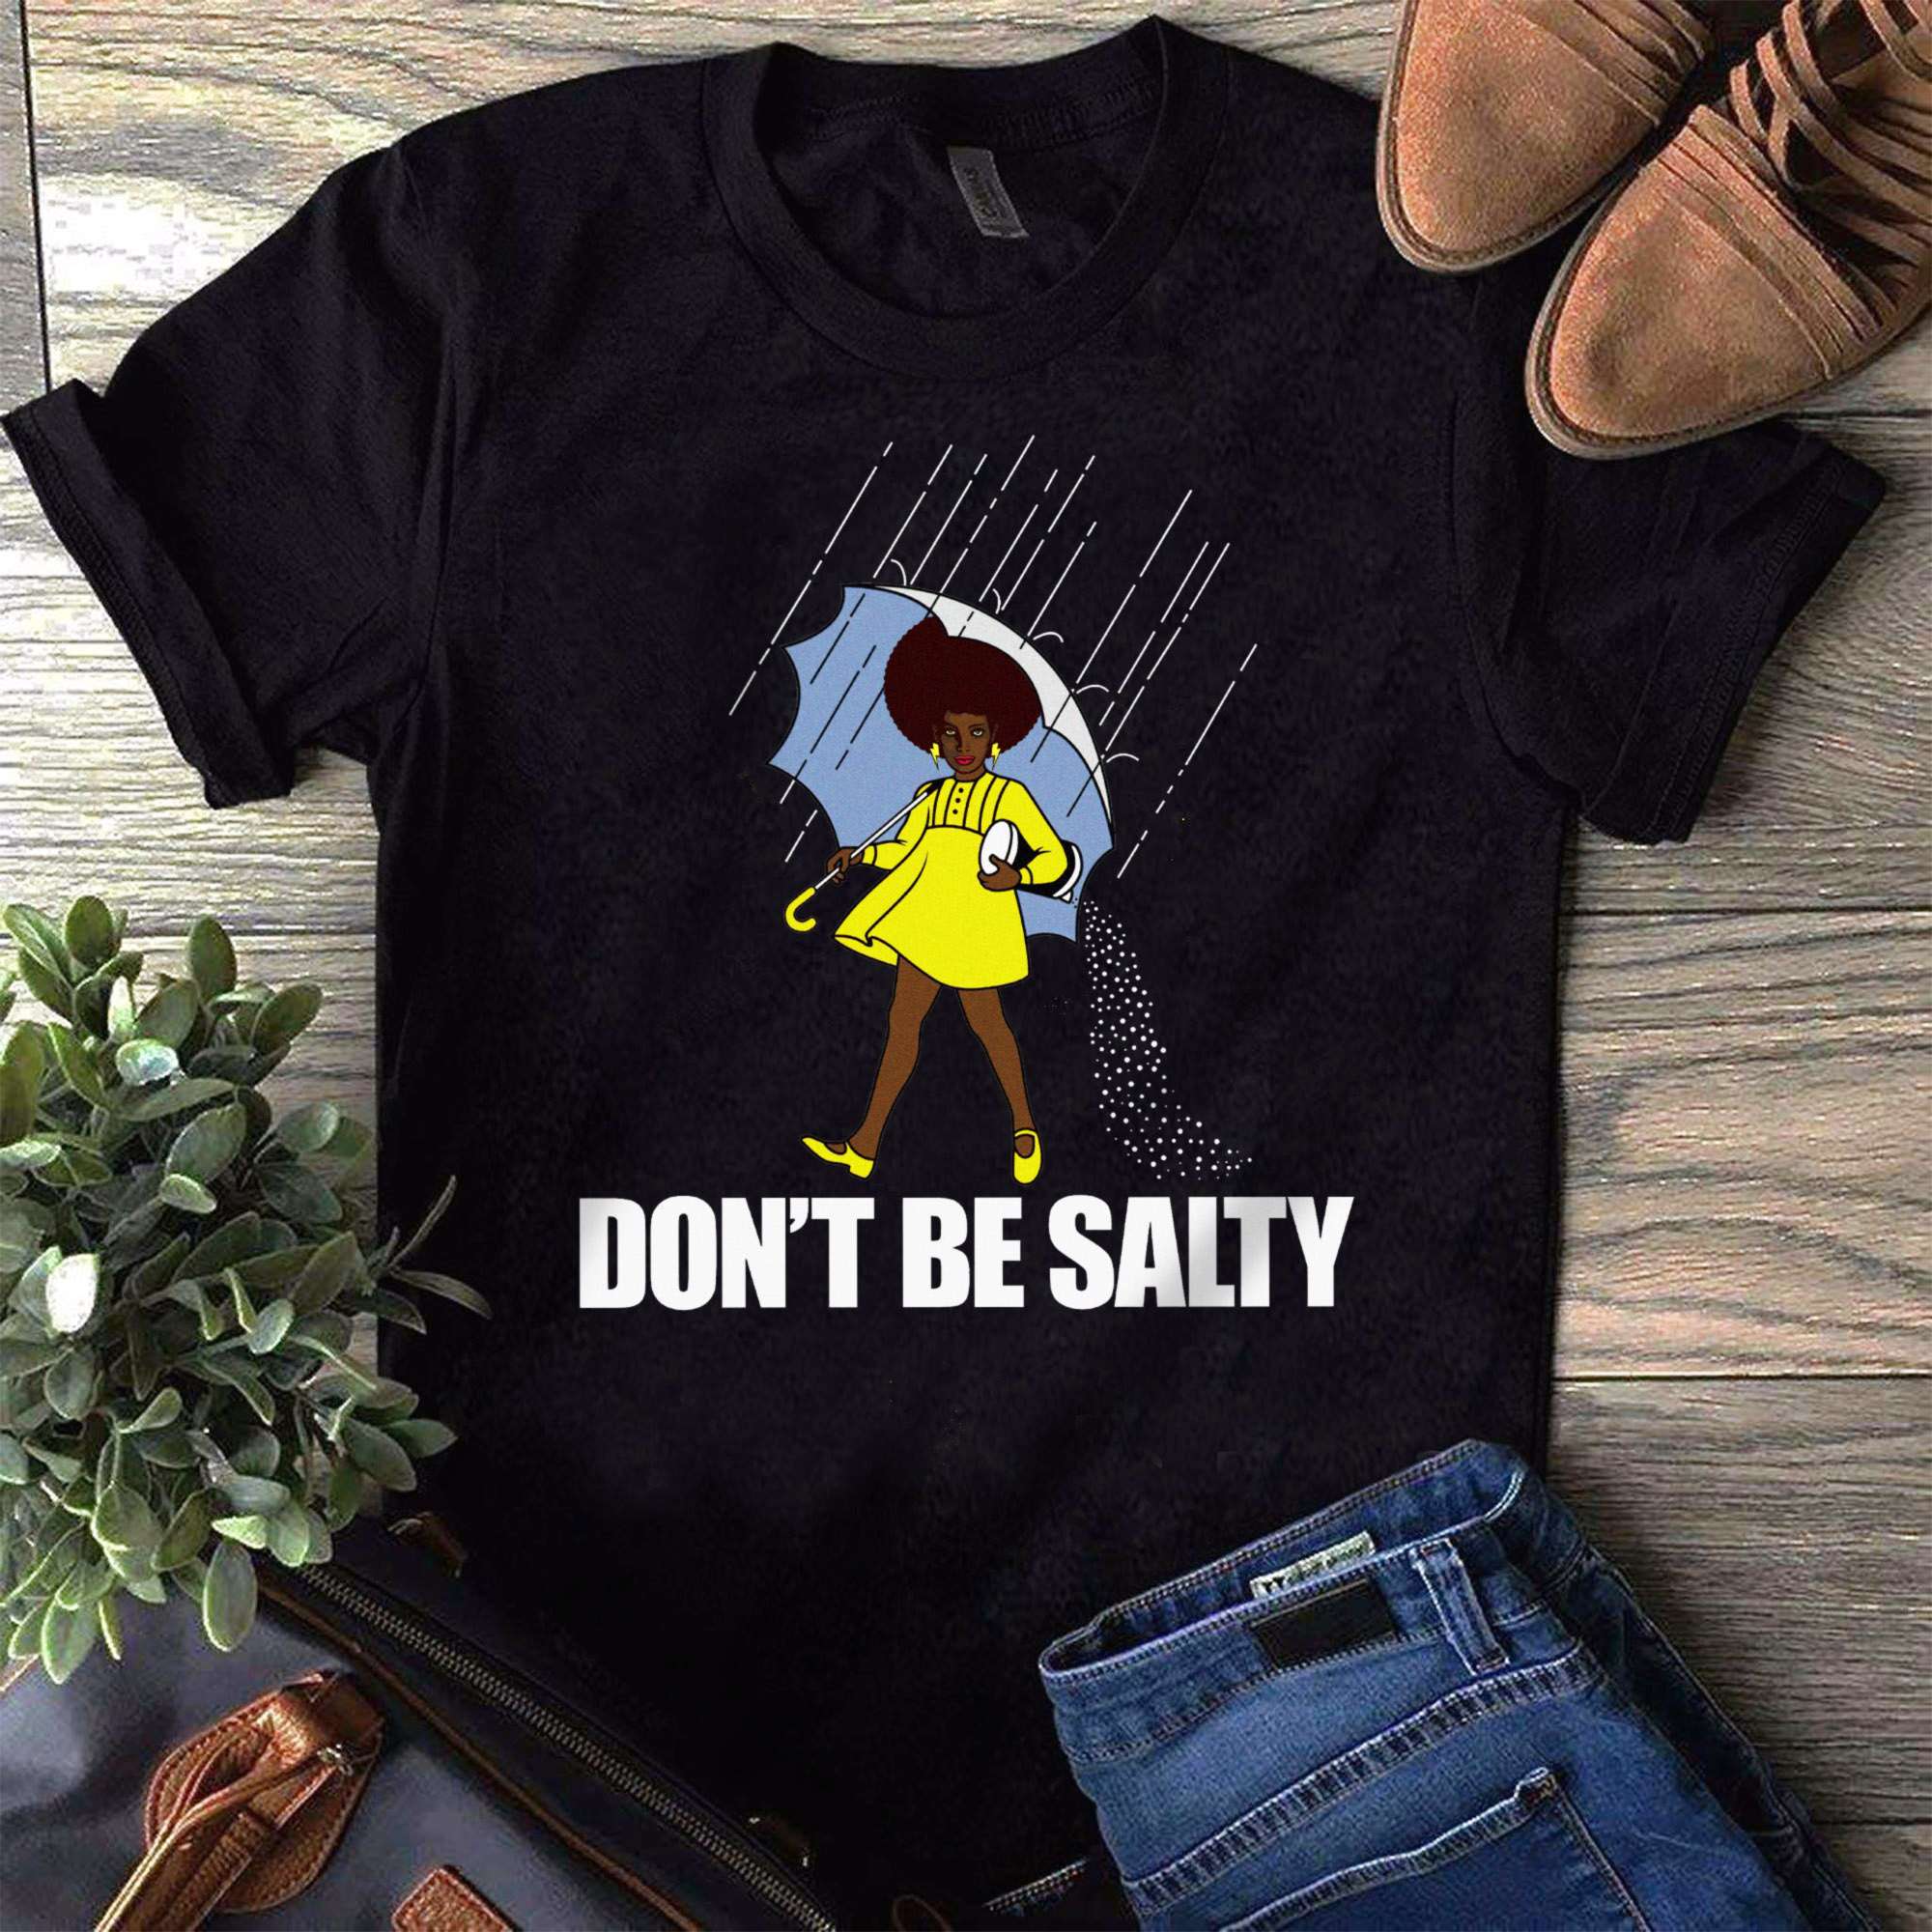 Don't be salty - Black woman with umbrella, black community